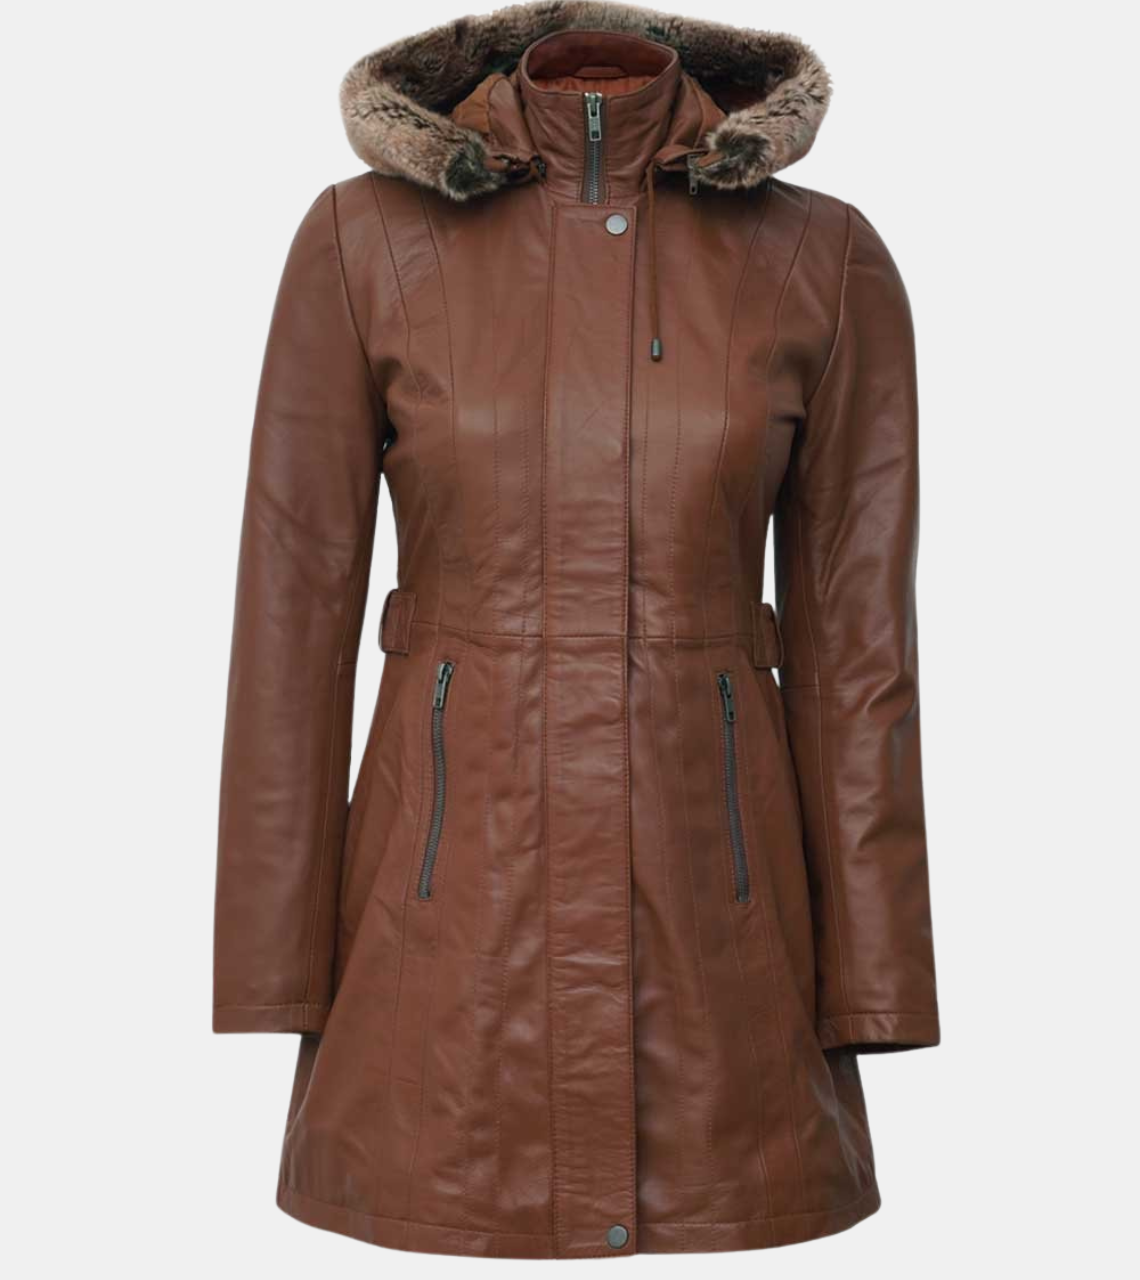 Women's Hooded Tan Brown Leather Coat